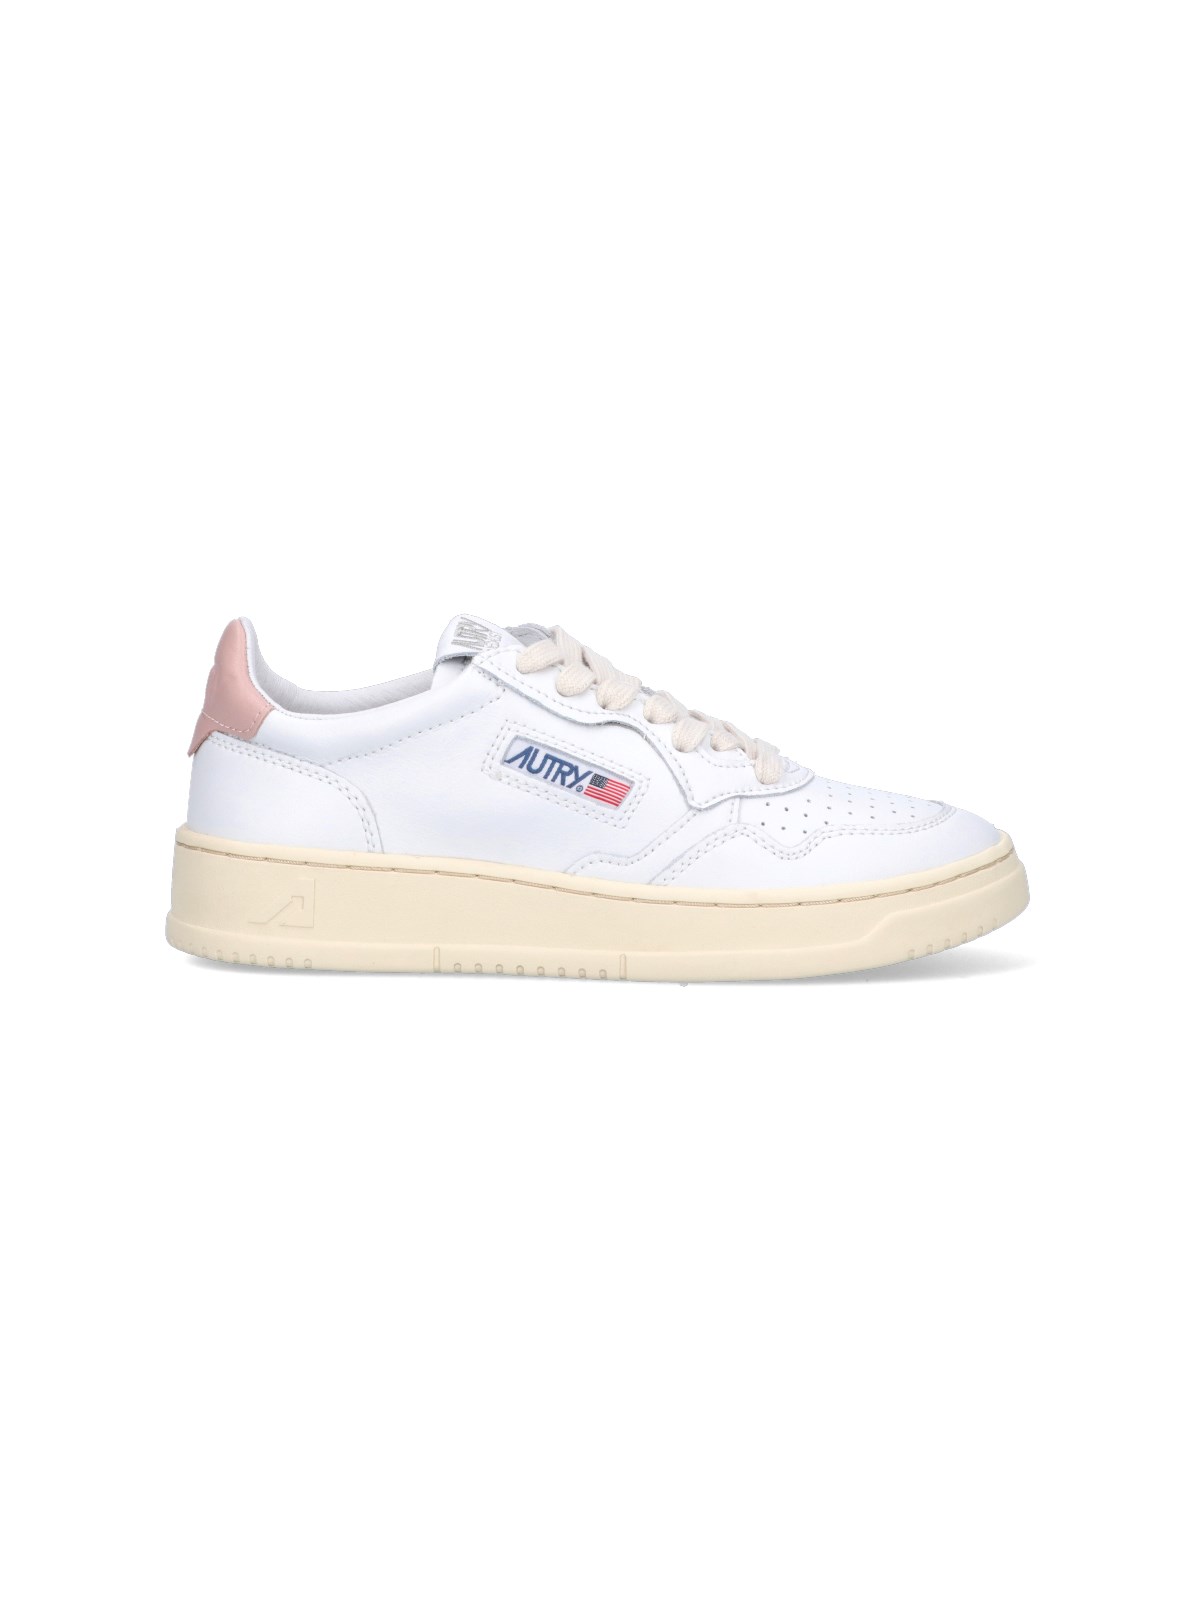 Shop Autry "medalist 01" Low Sneakers In White